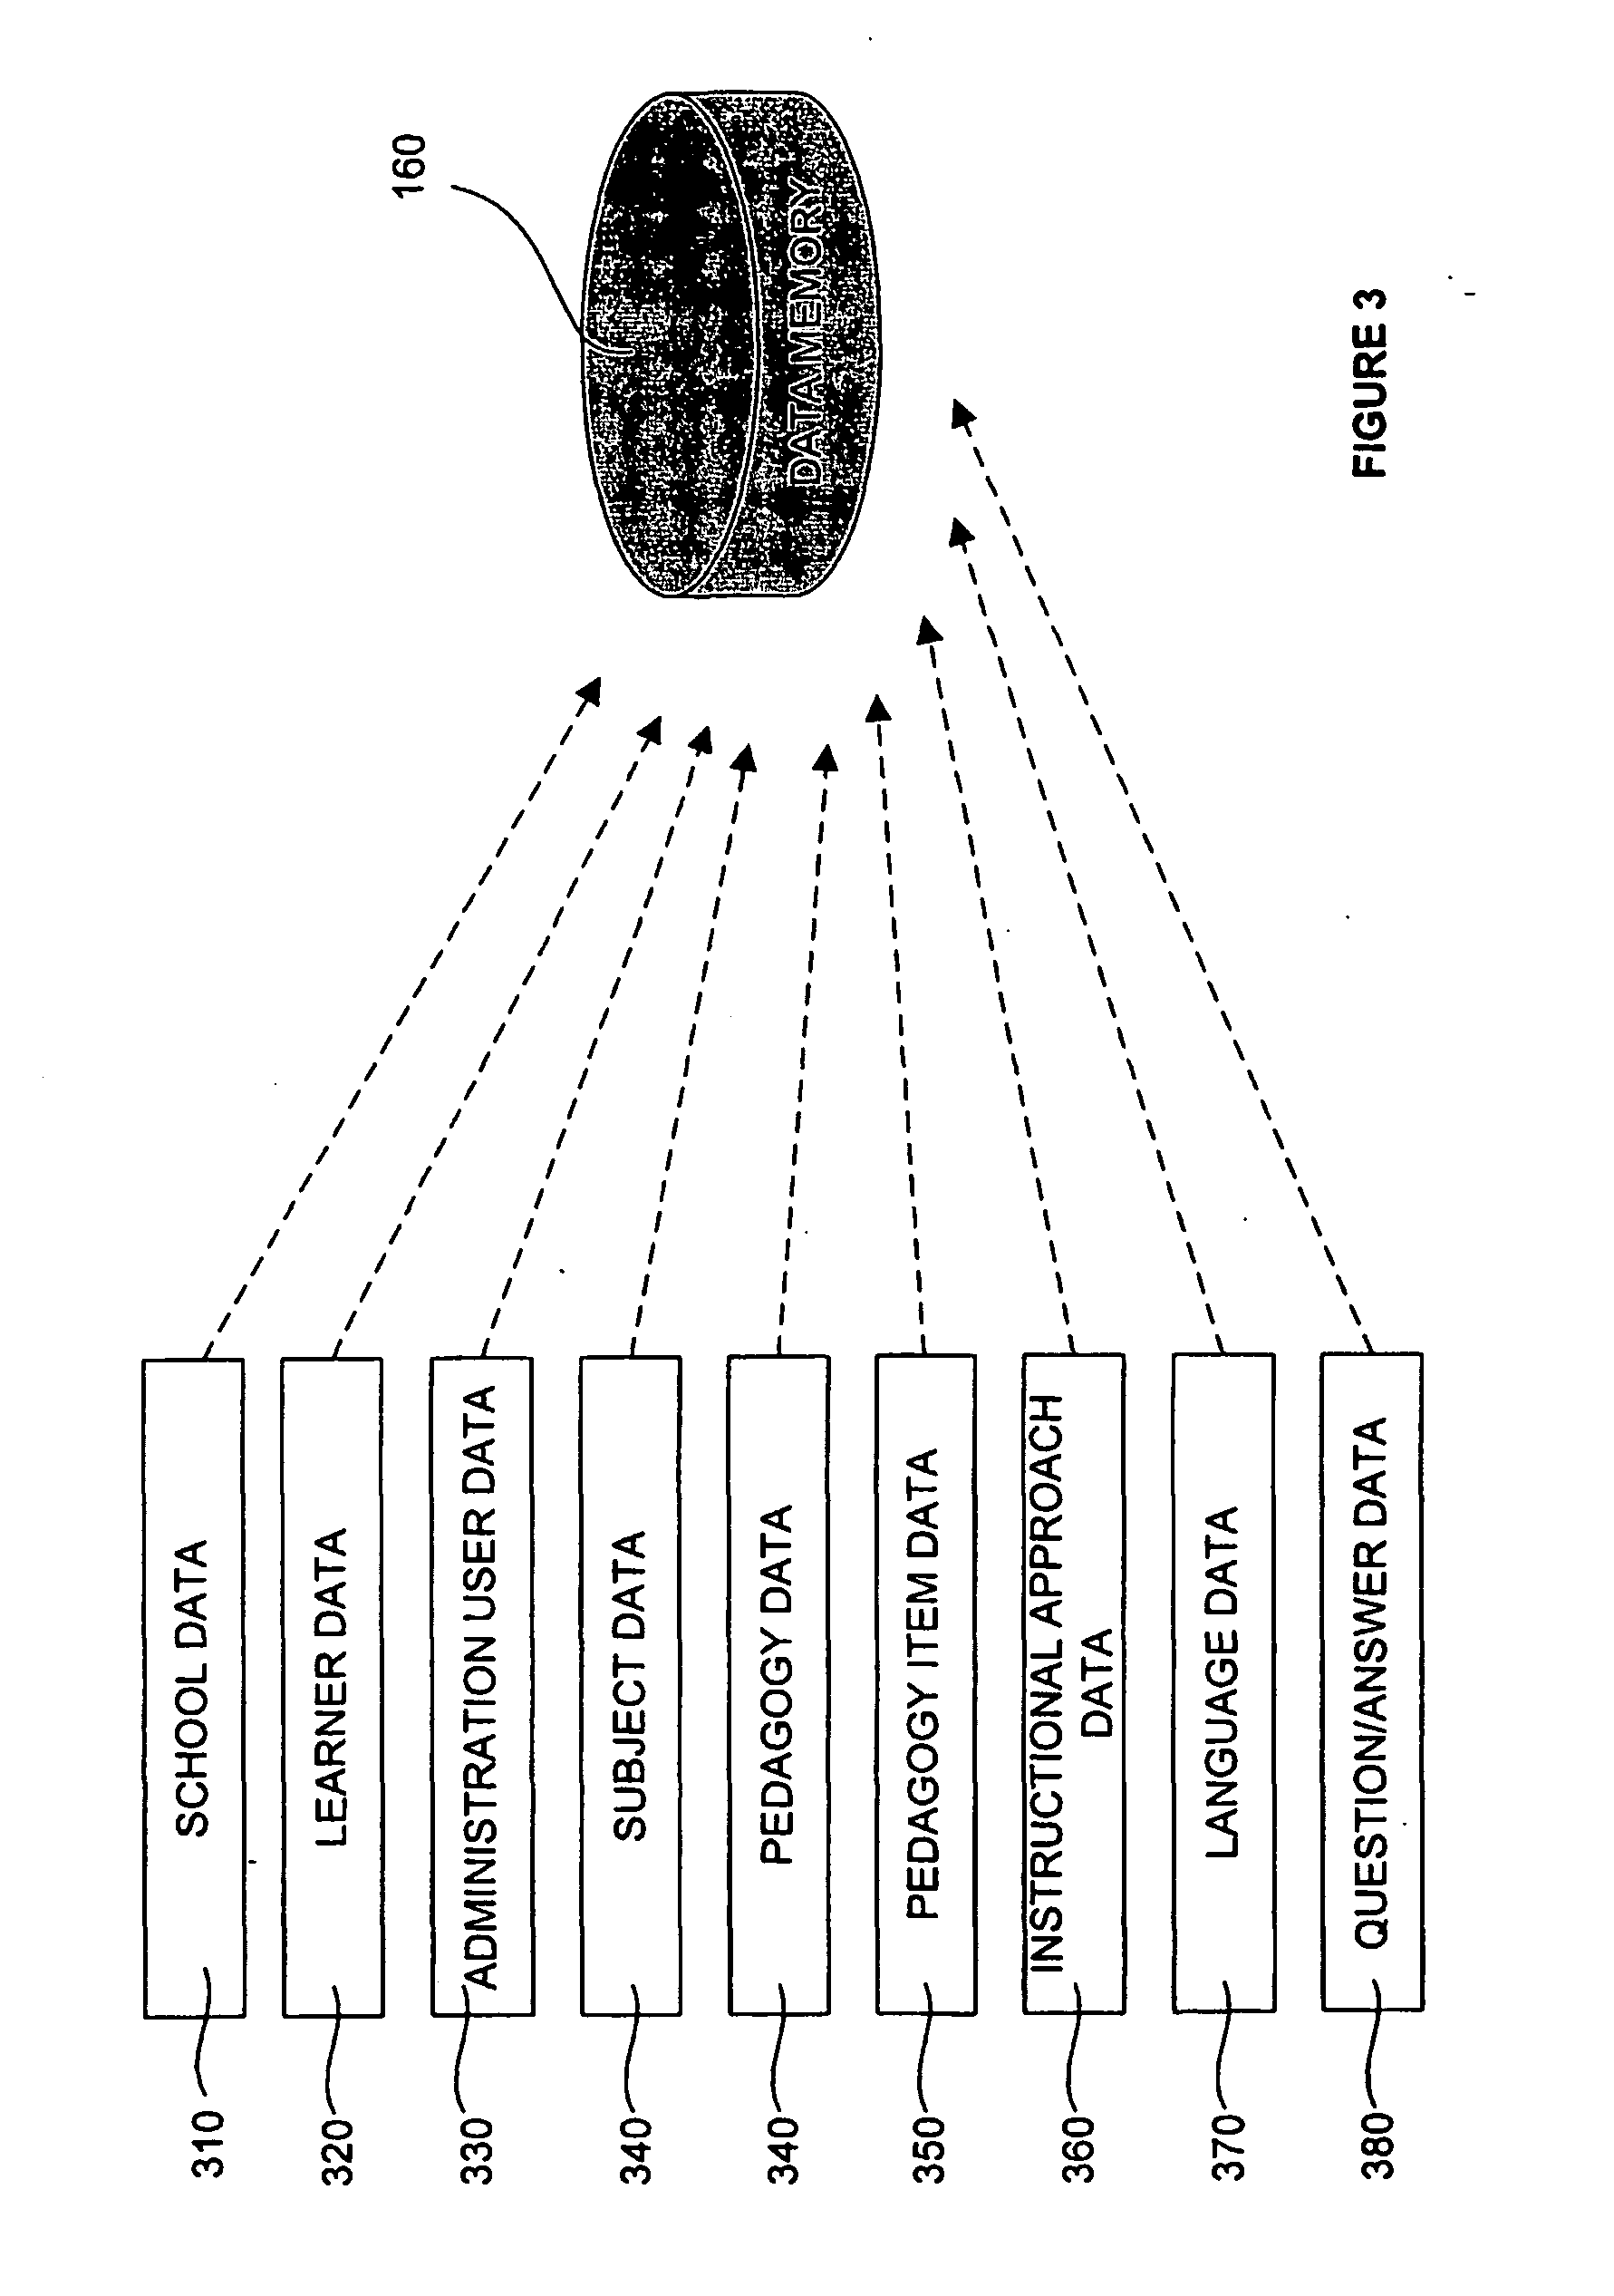 Synchronized formative learning system, method, and computer program